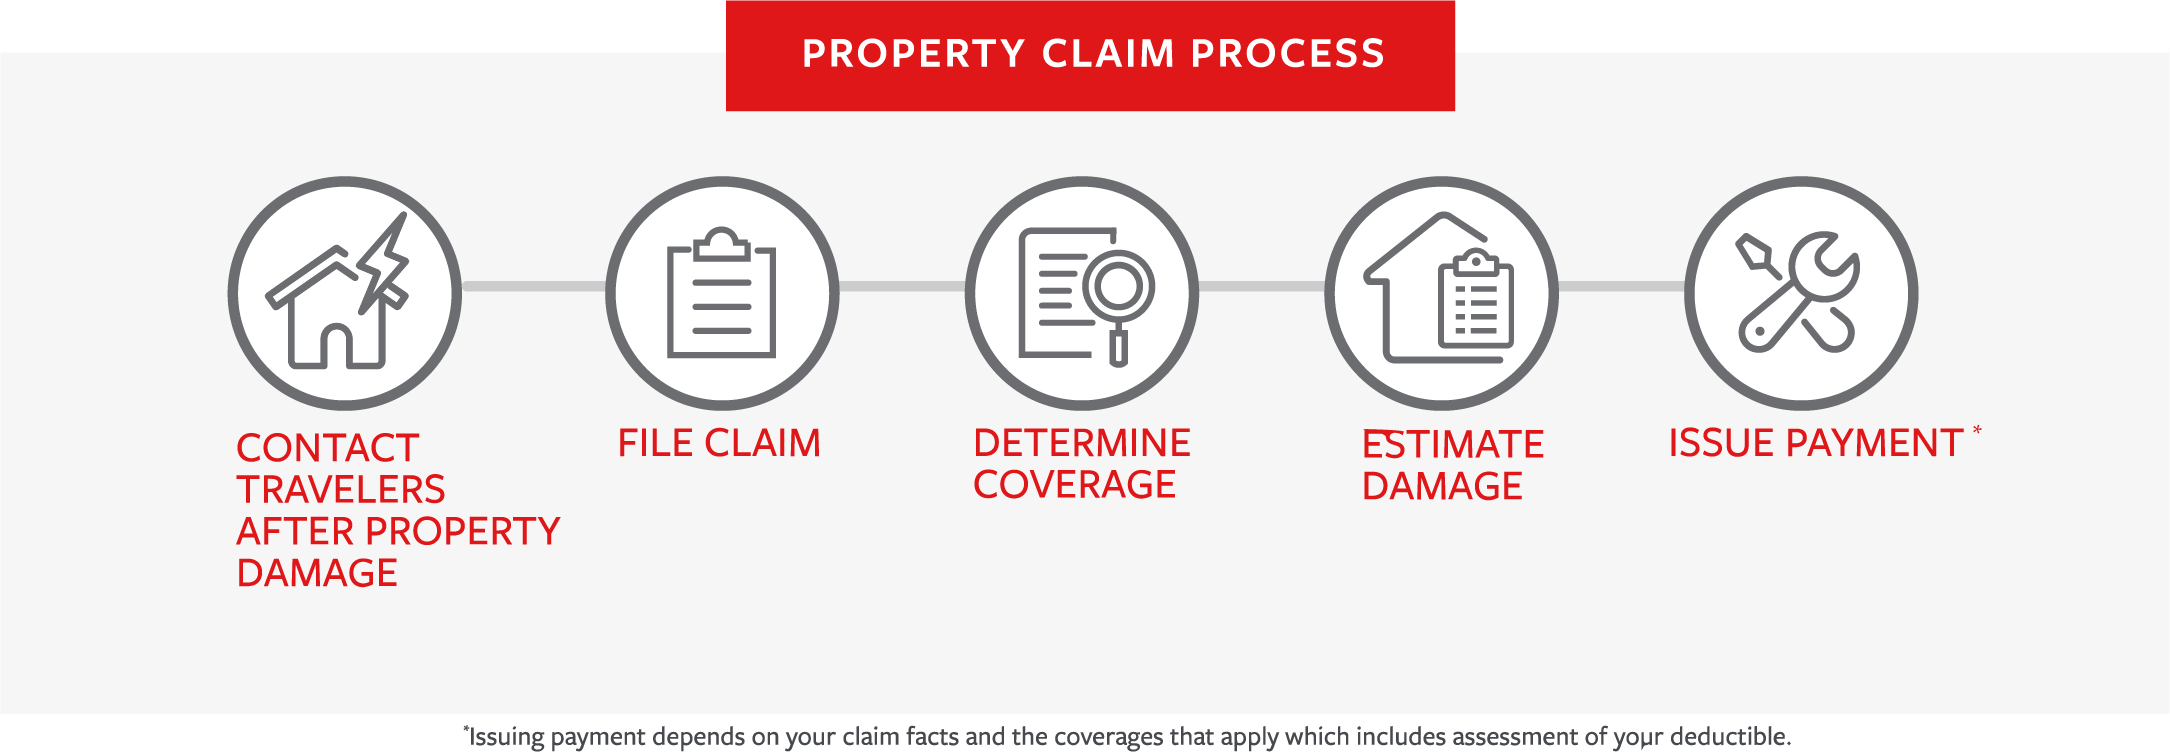 Property Claim Process. Contact Travelers after a loss to file a claim. Travelers will determine coverage and the value of your loss. Payment will depend on the facts of your claim and coverages that apply, which includes assessment of your deductible.